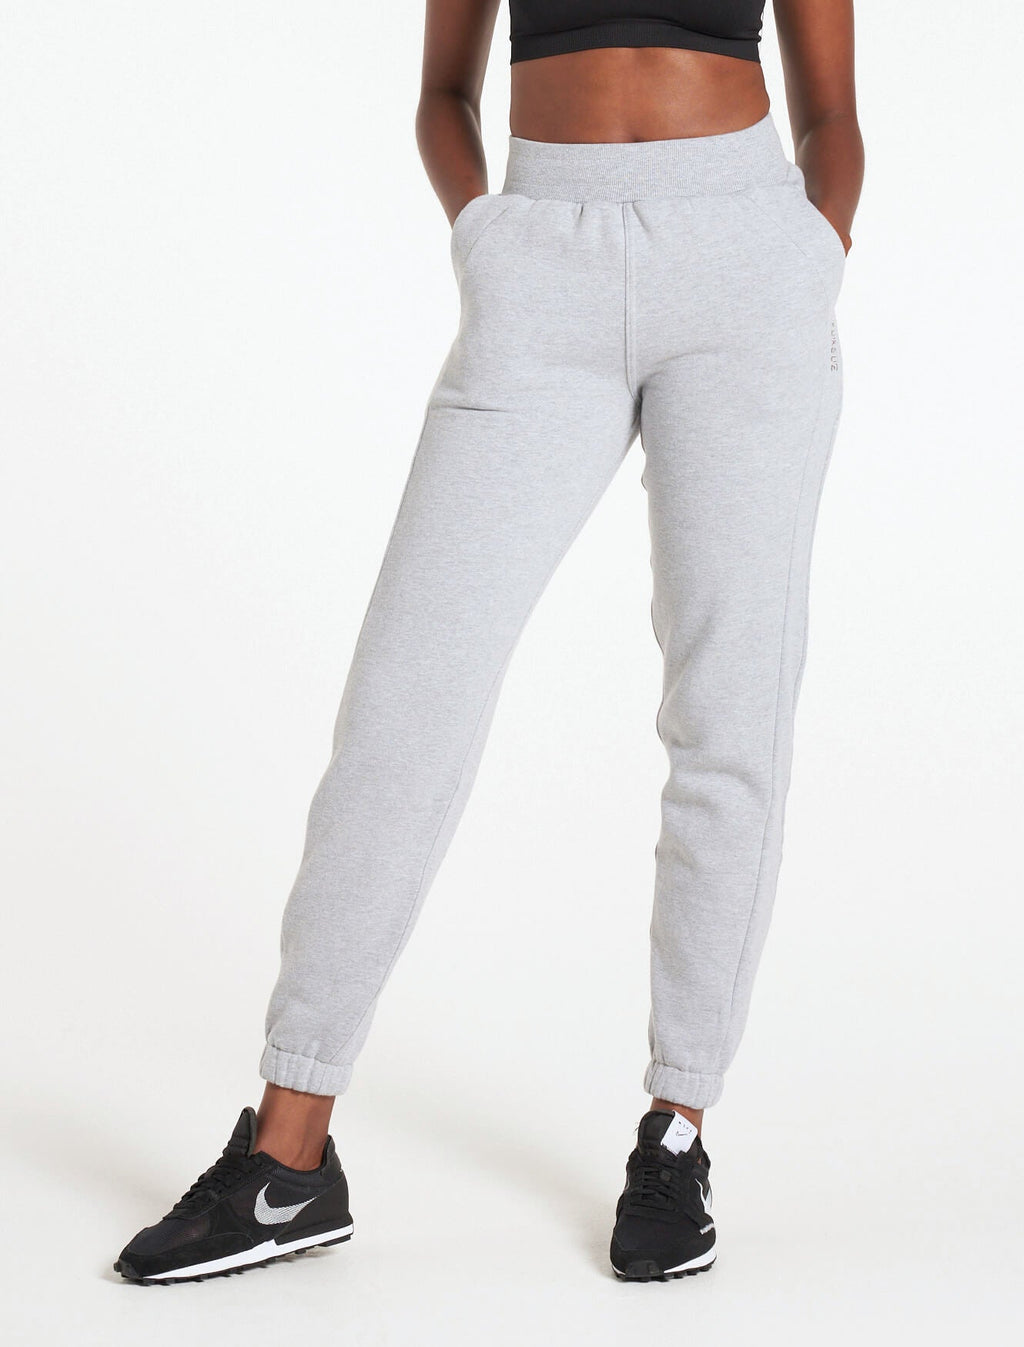 products/womens-select-bottoms-grey-marl.jpg